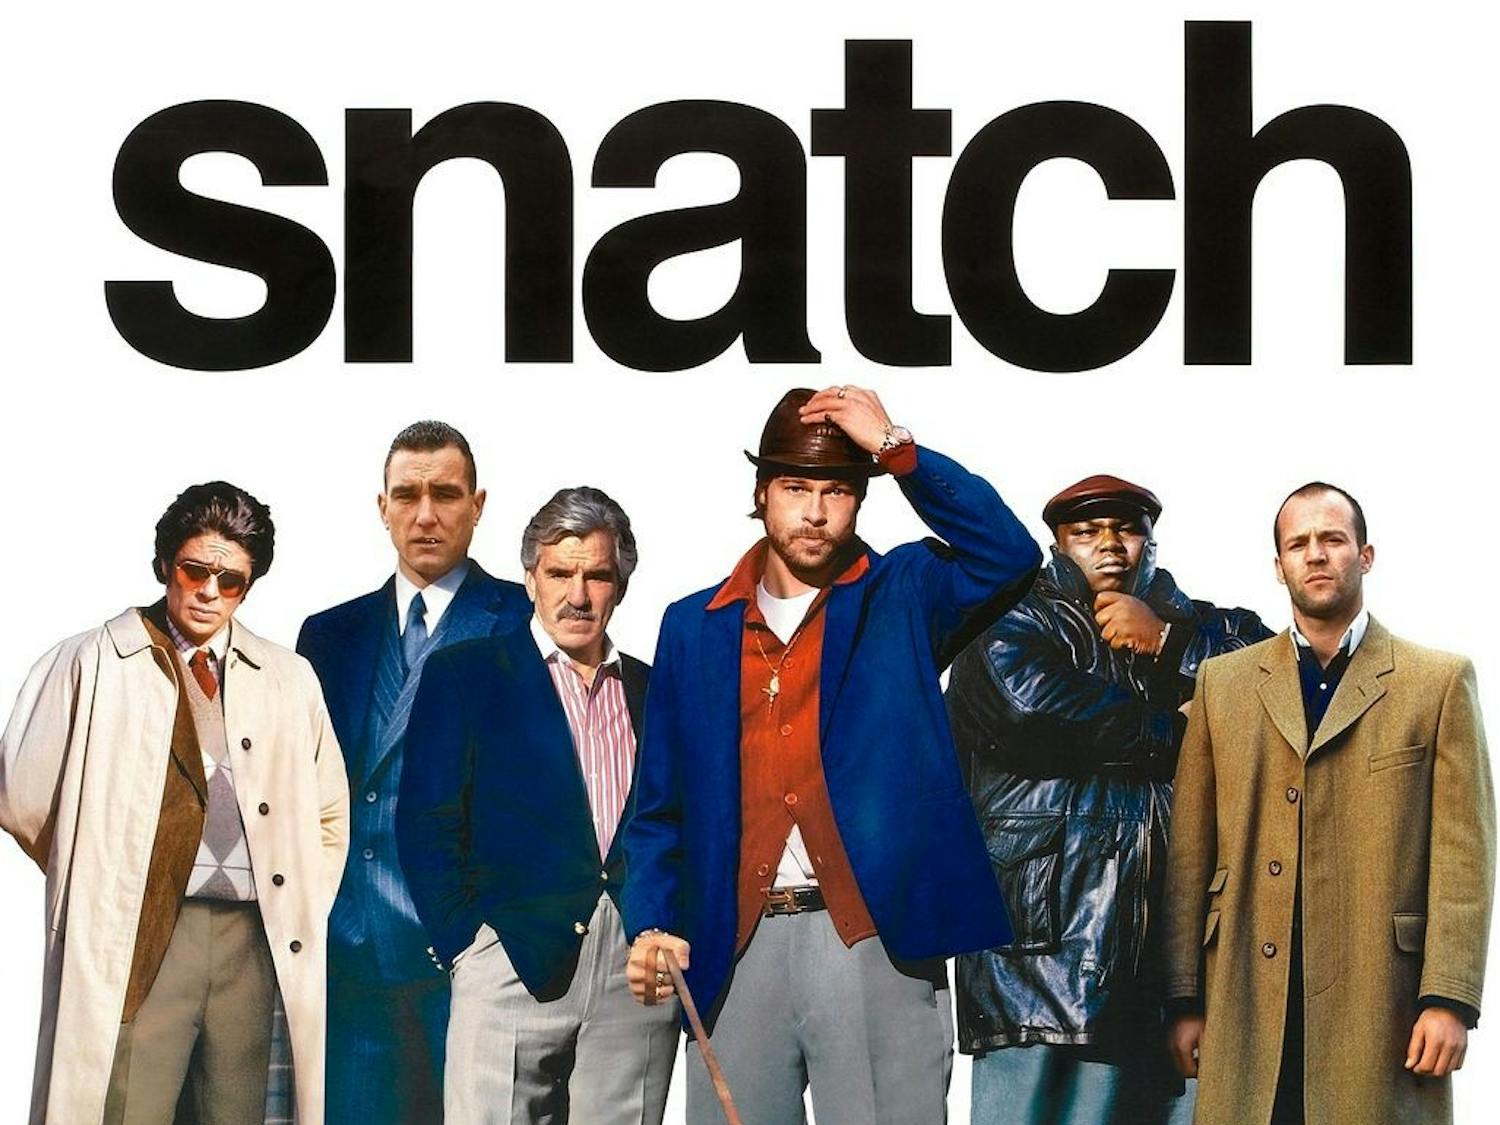 Released at the dawn of the new millennium, “Snatch” is sure to delight and confuse.

